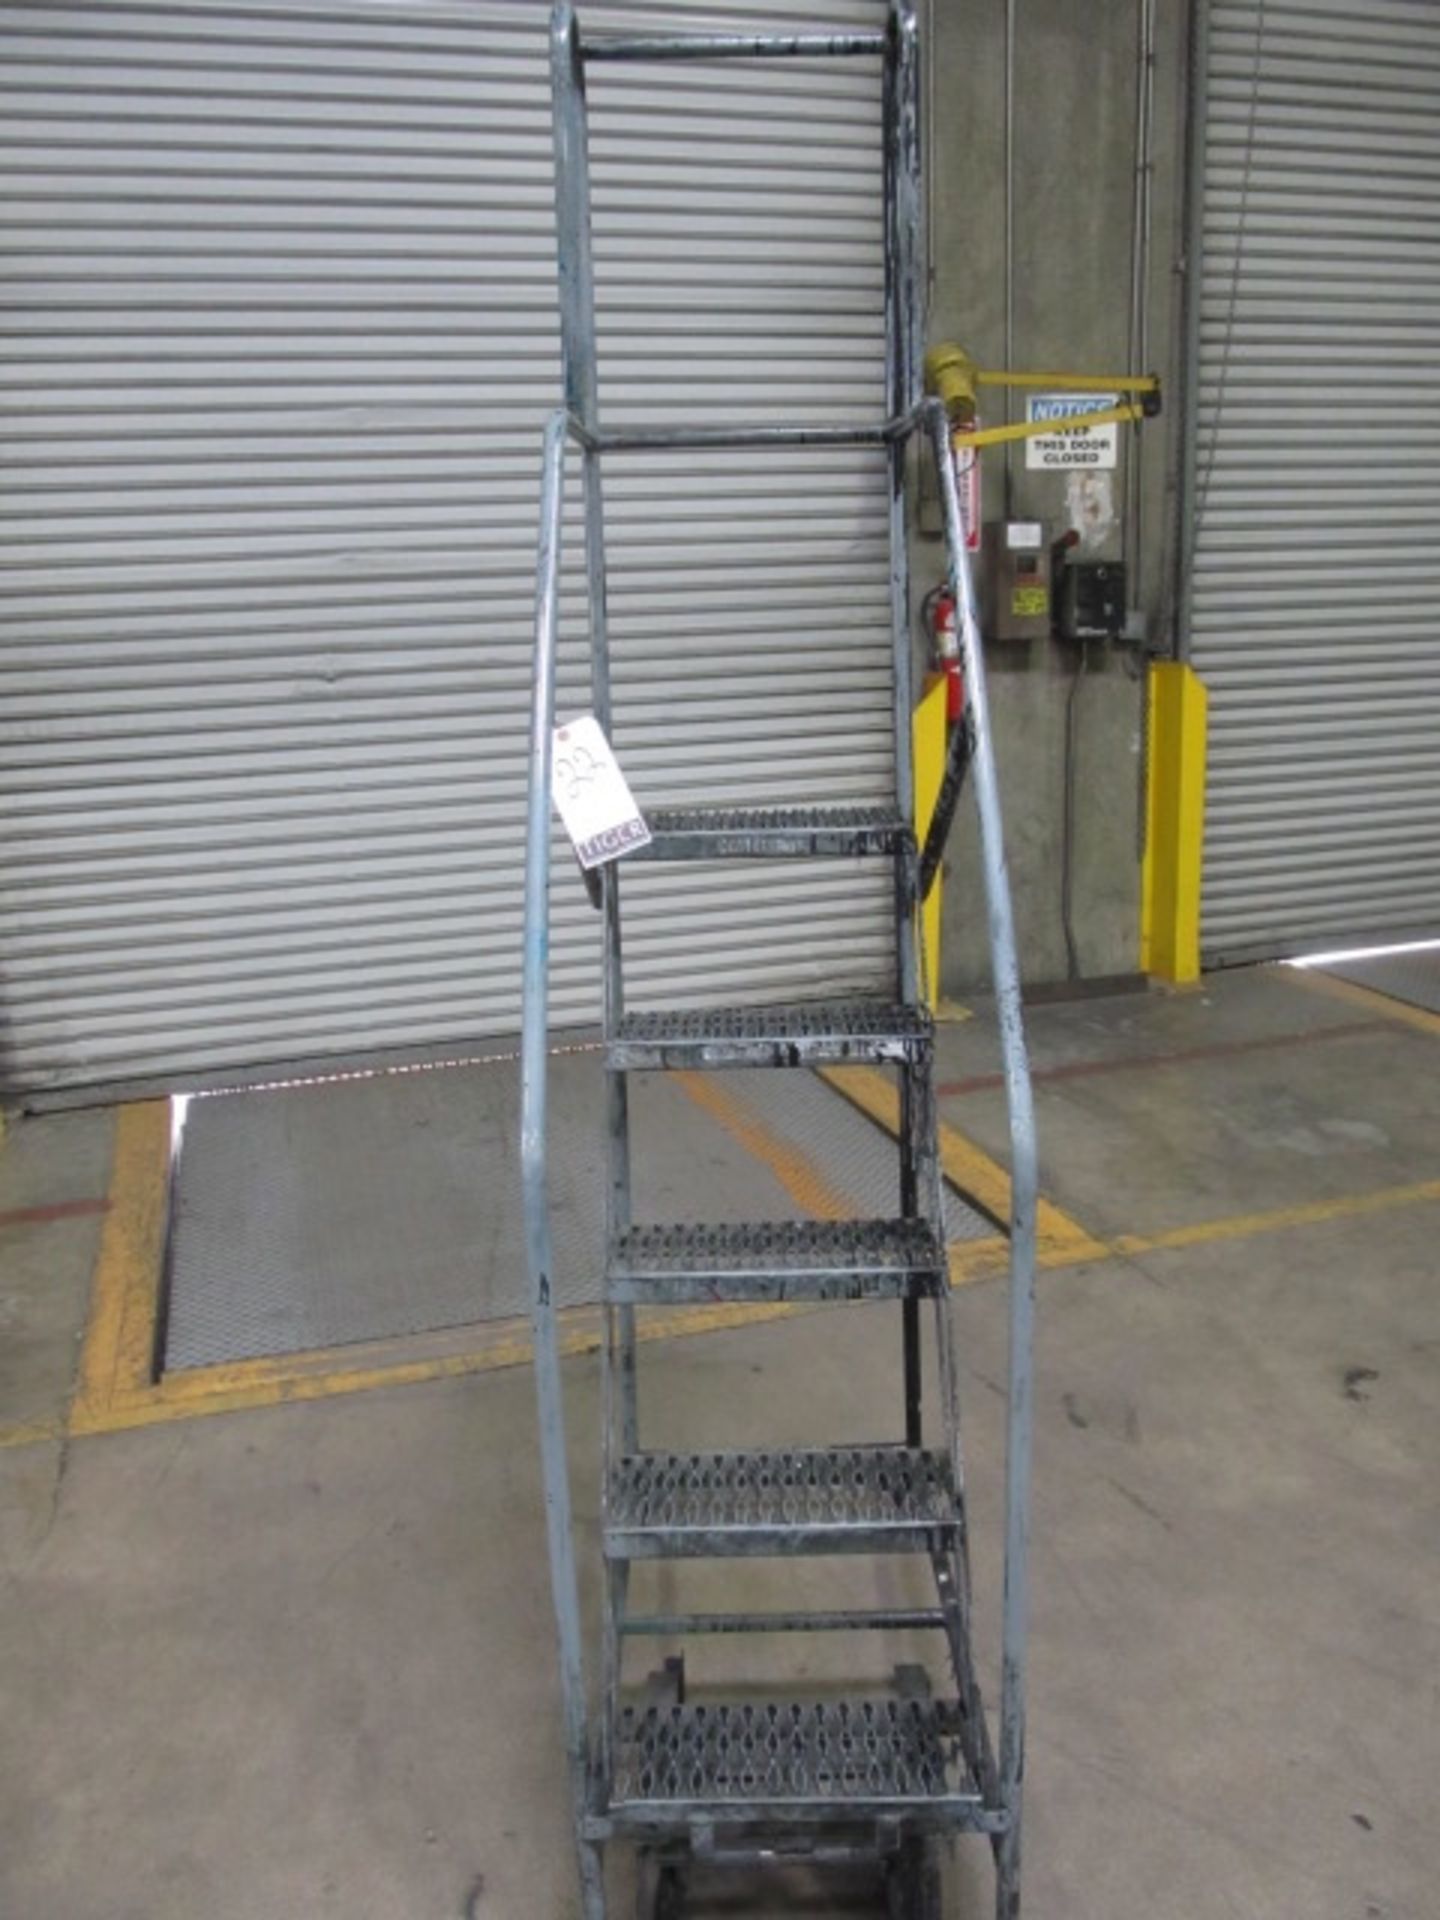 Cotterman 350lb Capacity 5 Step Rolling Staircase. Asset Location: West Warehouse, Site Location: